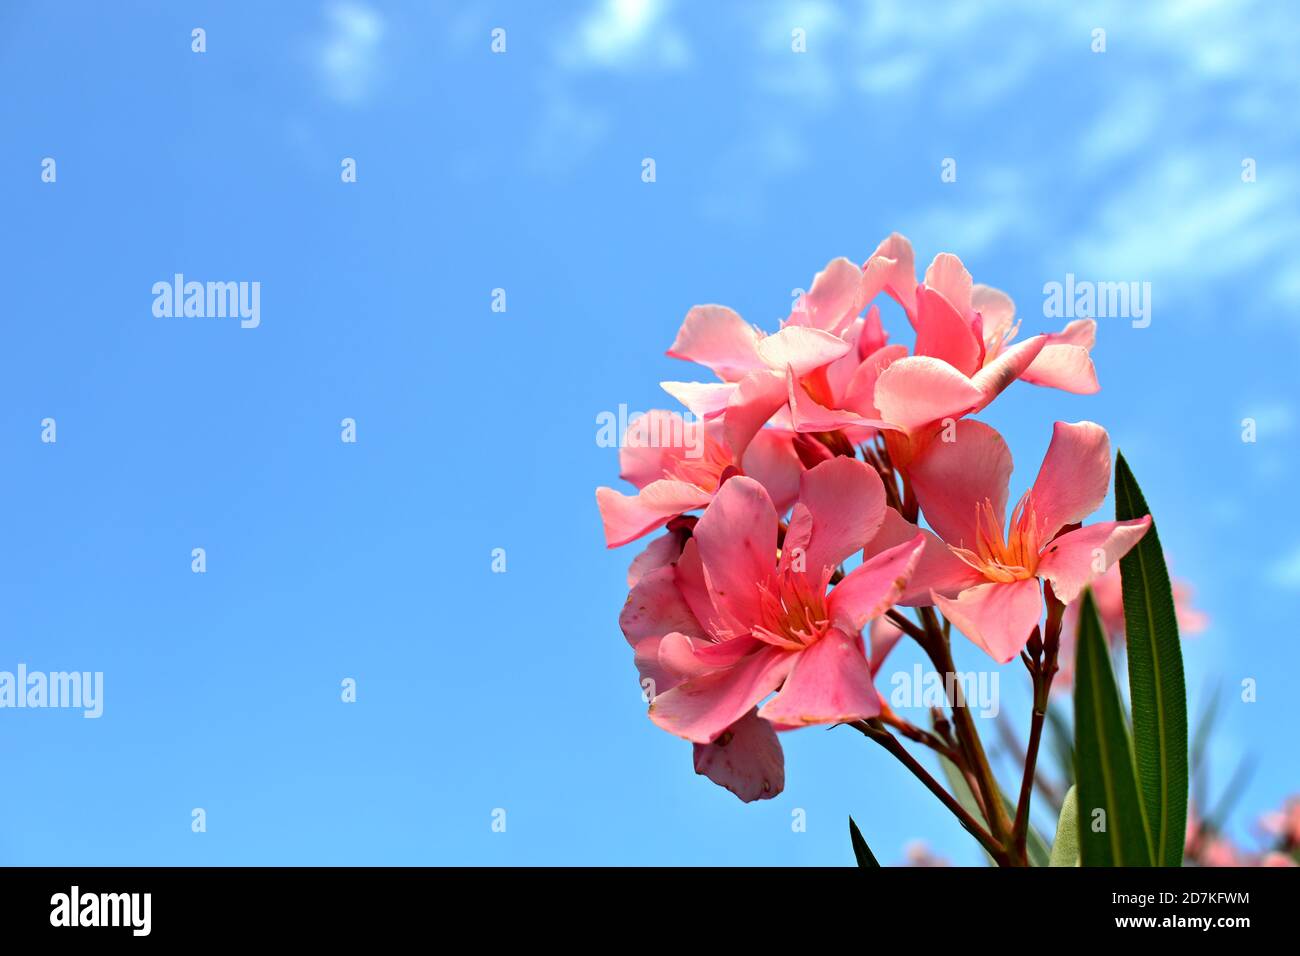 Pinkish flowers with blue sky in the background. Nerium oleander (Oleandr obecný). Stock Photo